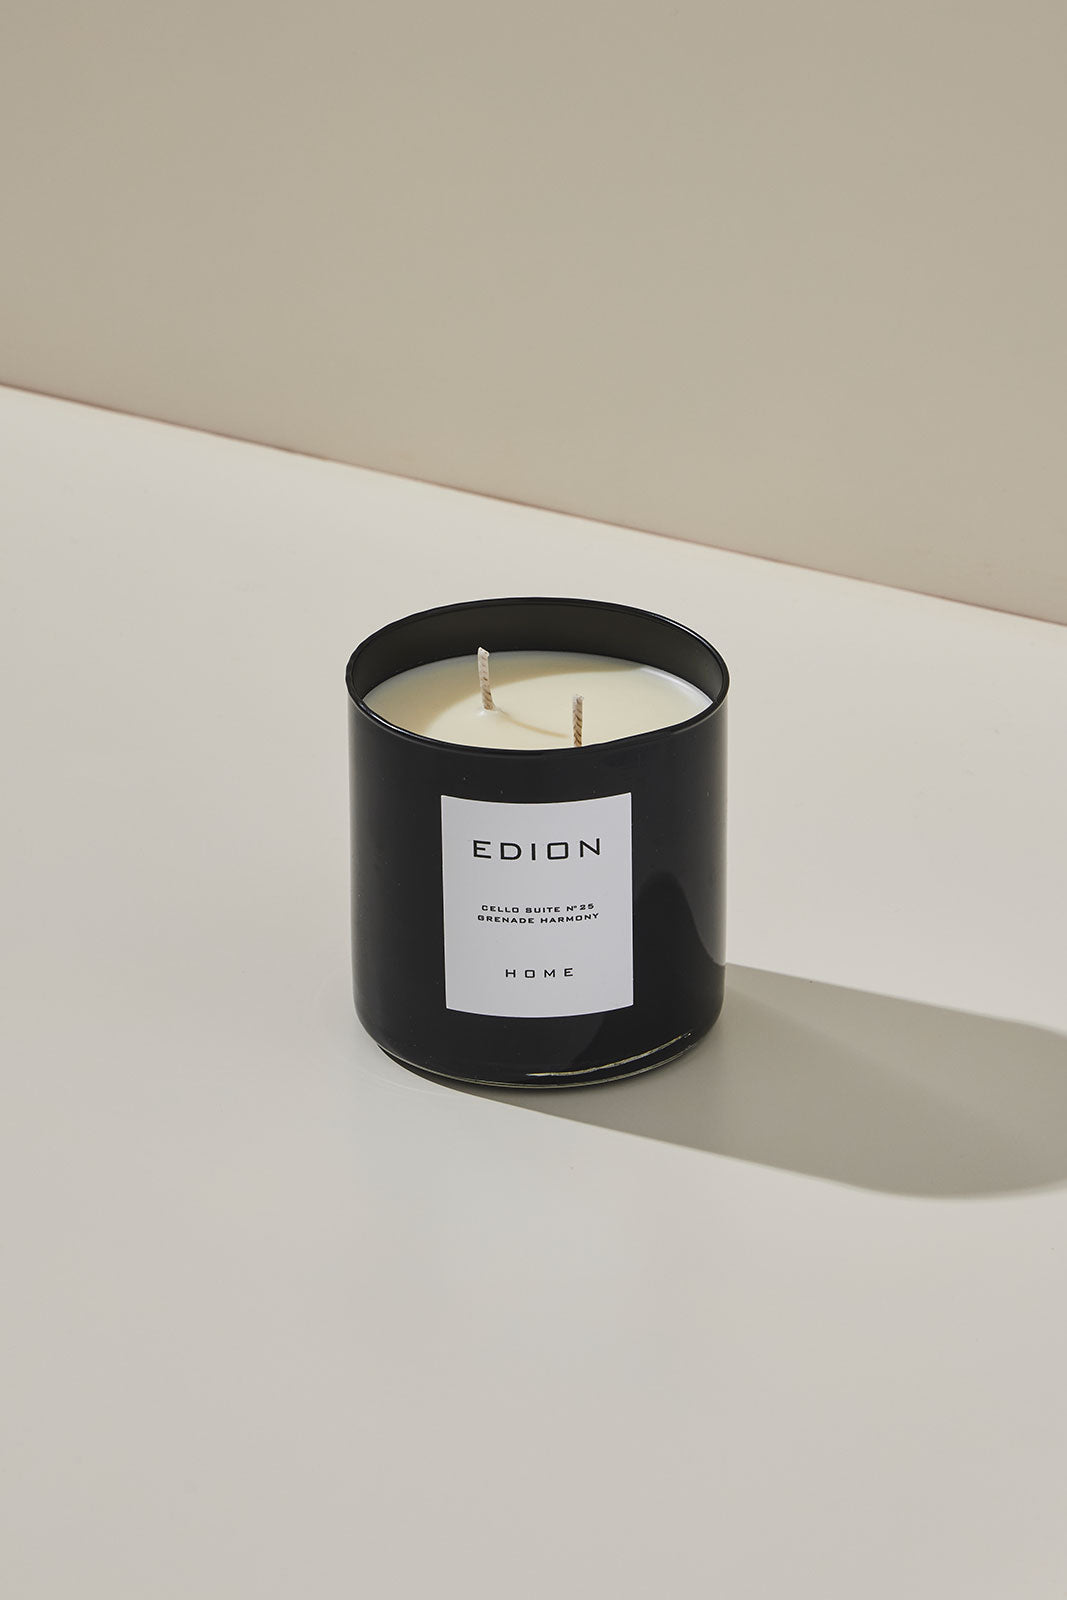 Scented candle Cello suite n. 25 Grenade Harmony